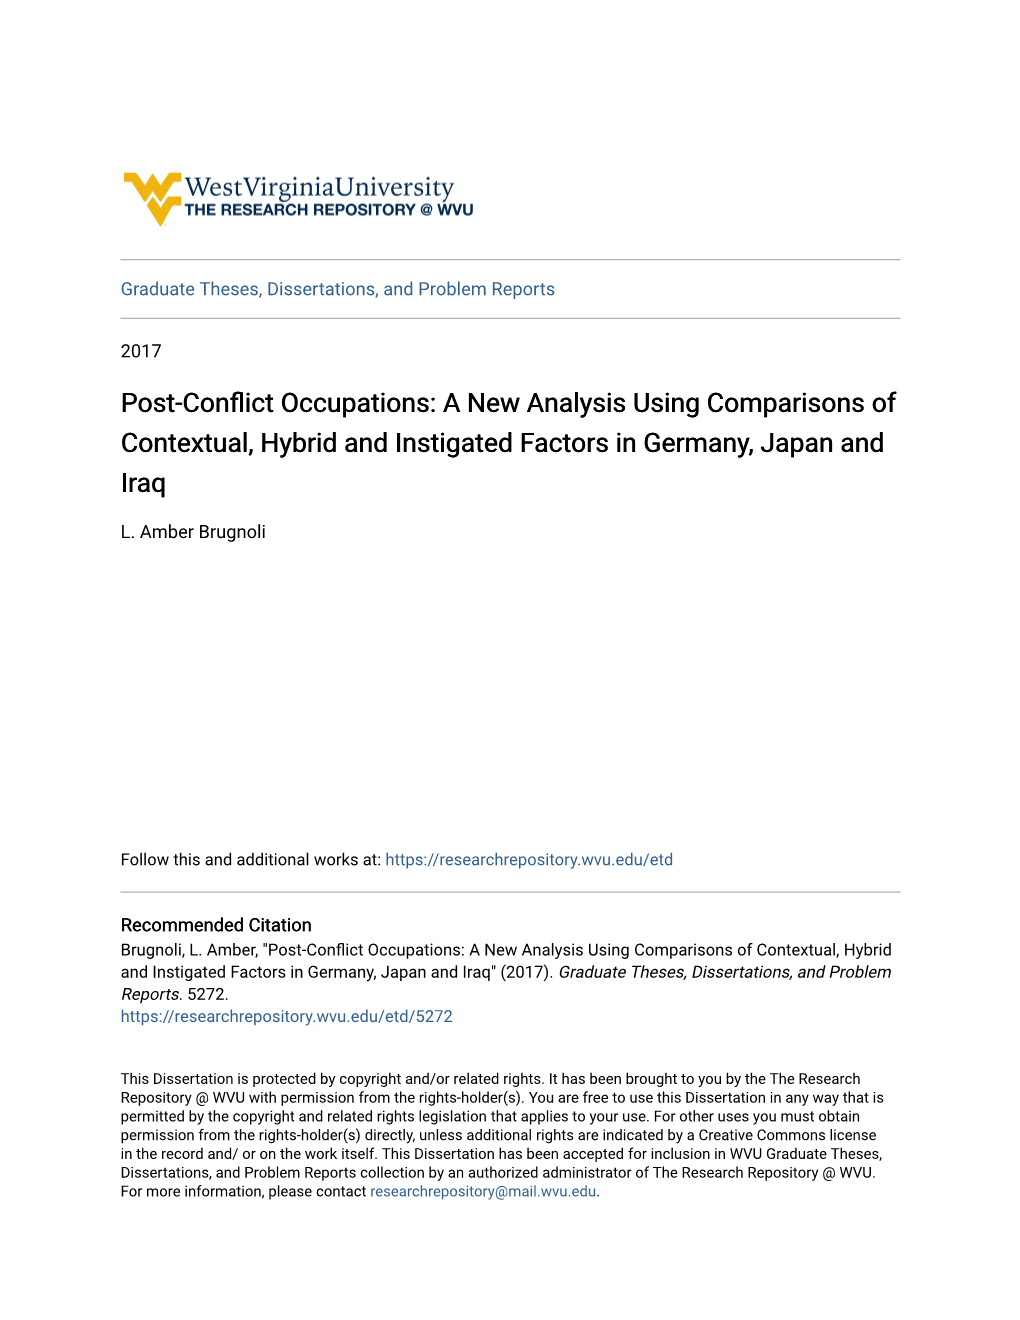 Post-Conflict Occupations: a New Analysis Using Comparisons of Contextual, Hybrid and Instigated Factors in Germany, Japan and Iraq